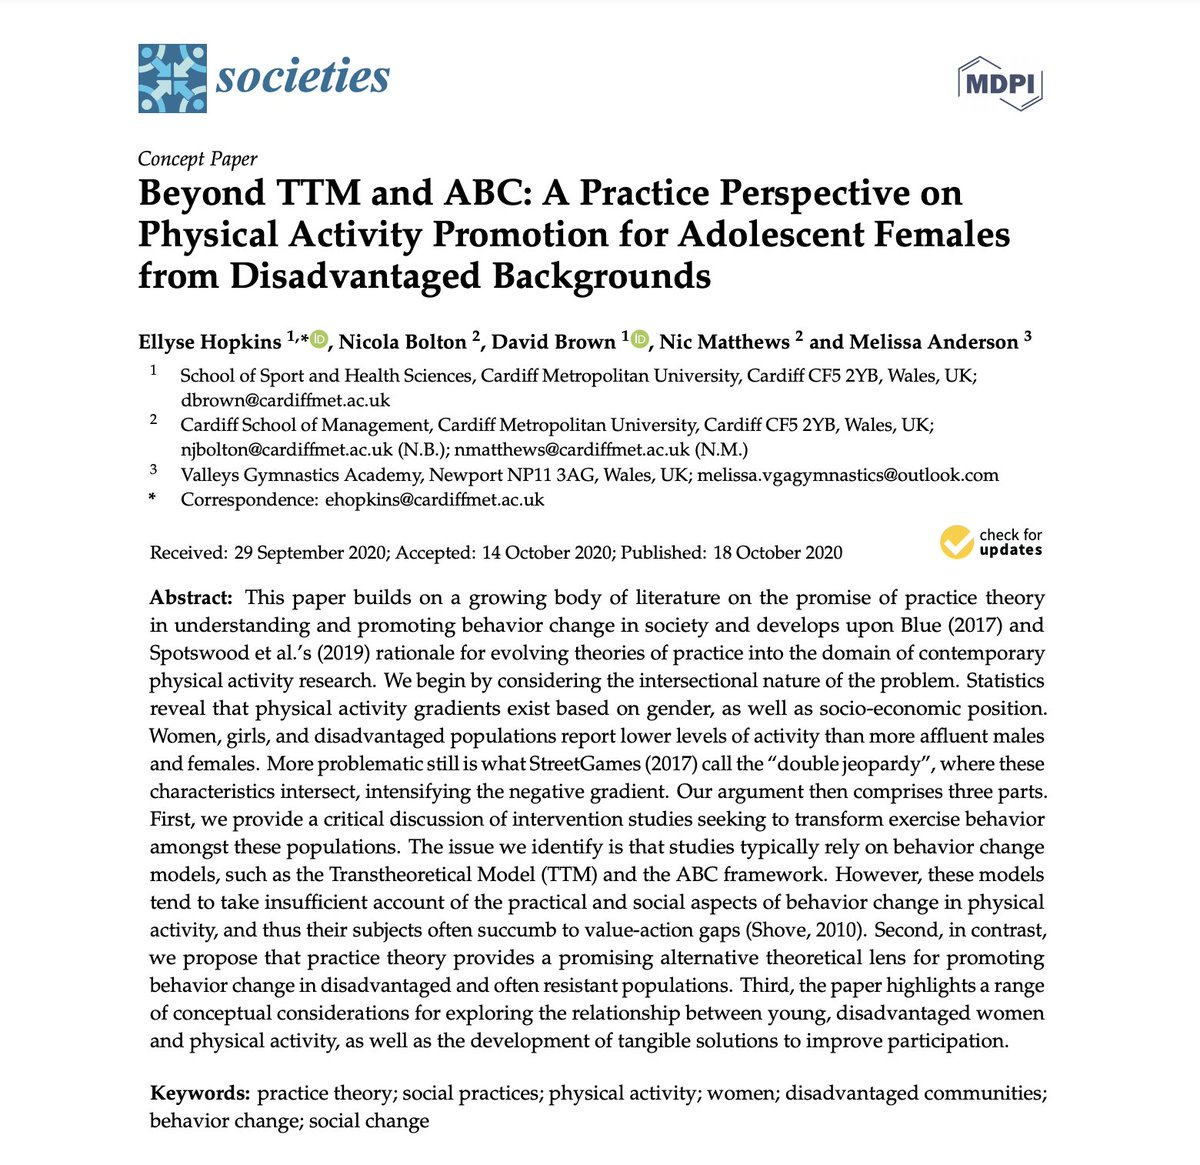 Feels great to get the first publication under my belt with @Societies_MDPI ! Grateful as ever to my supervisory team and the support of @VGAGymnastics and @KESS_Central 📚

'Beyond TTM and ABC...'

#openaccess #practicetheory #physicalactivitypromotion 

mdpi.com/2075-4698/10/4…